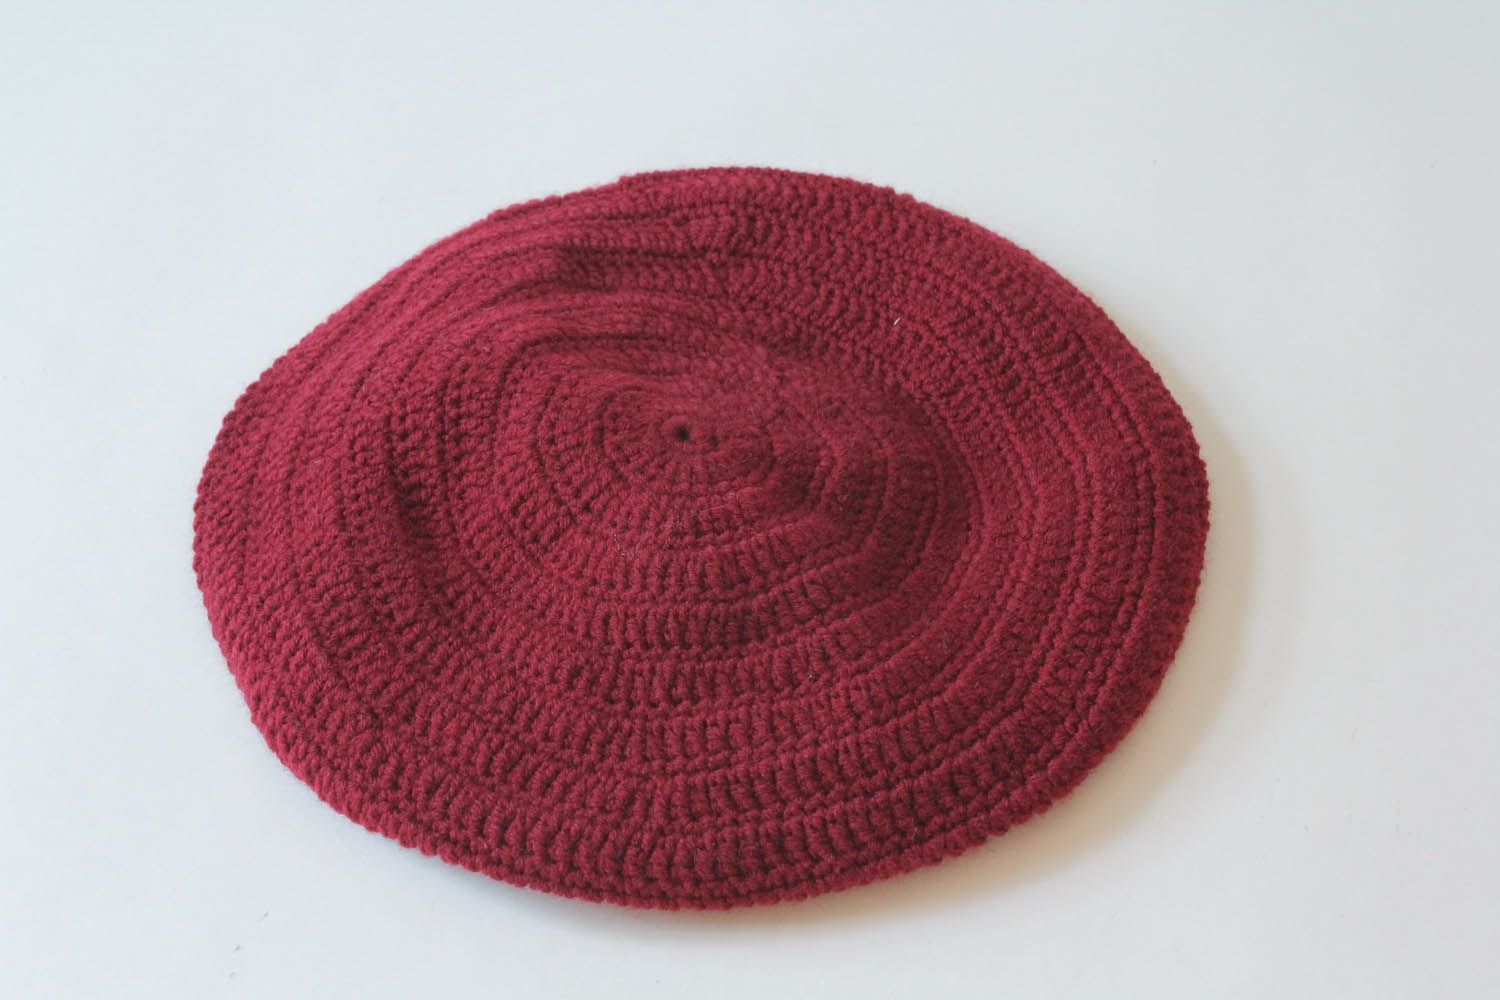 Knitted beret photo 3